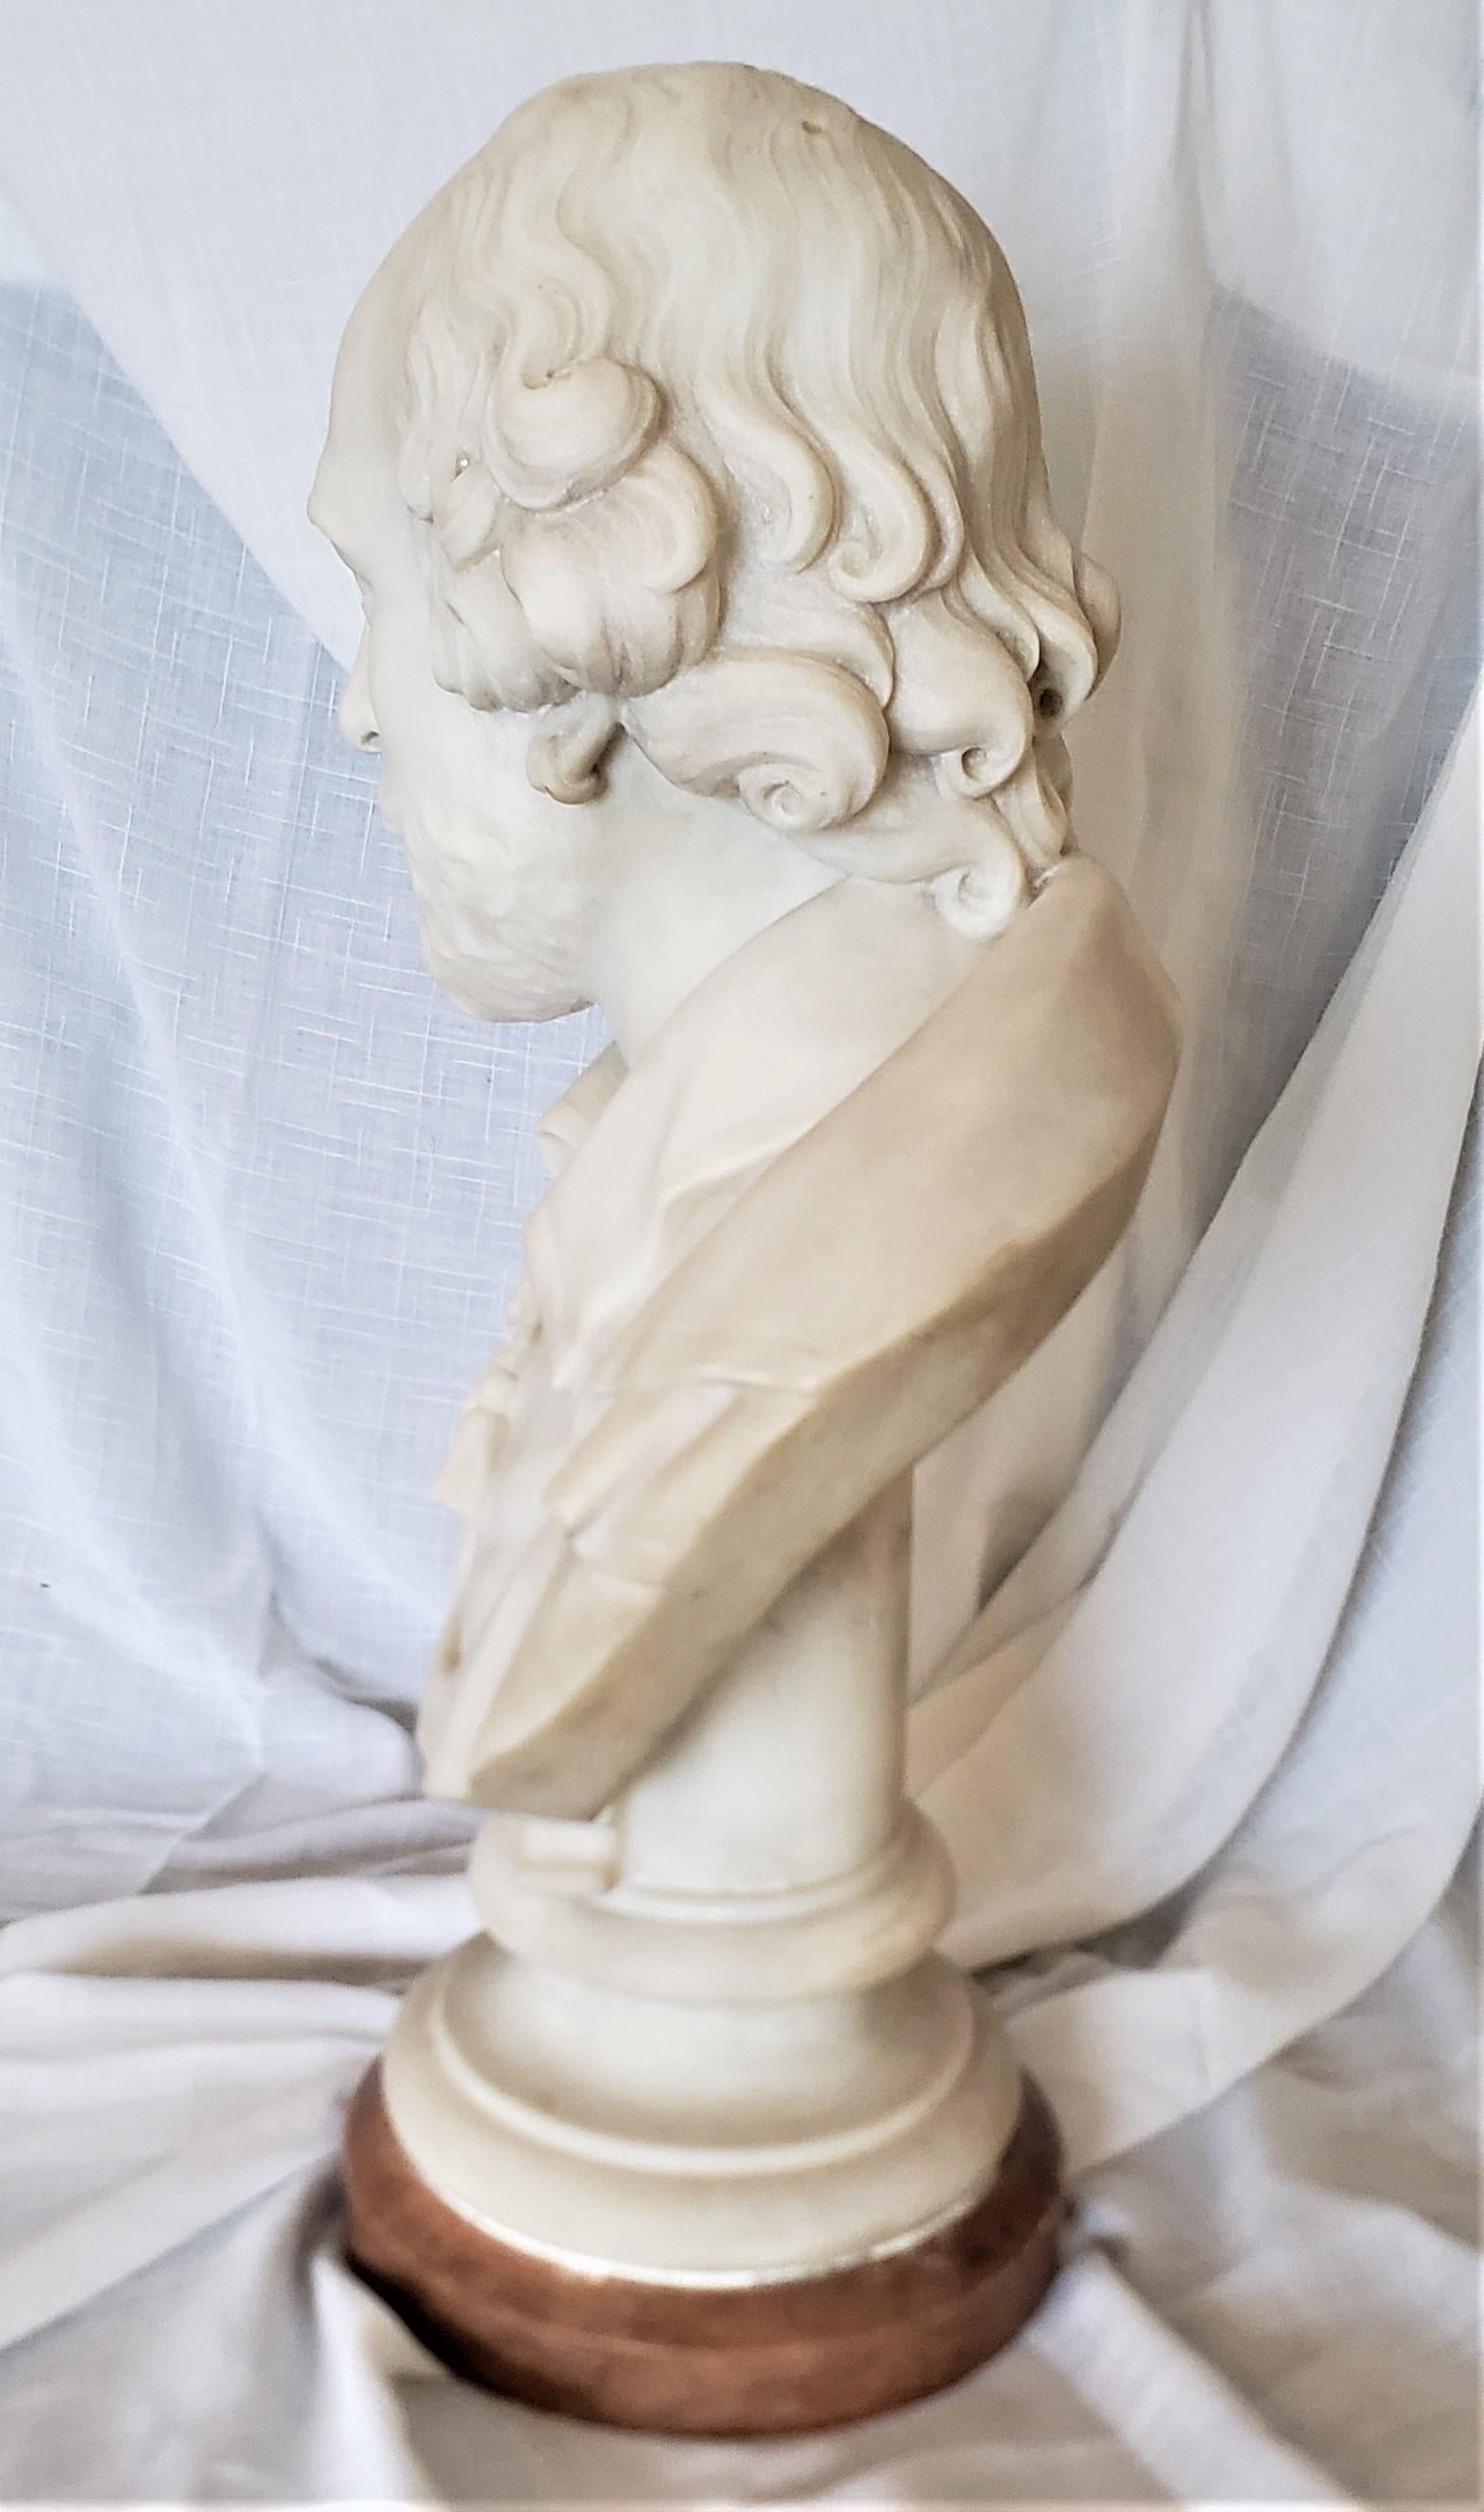 19th Century Large Antique English Signed C. Papworth Hand-Carved Marble Bust or Sculpture For Sale